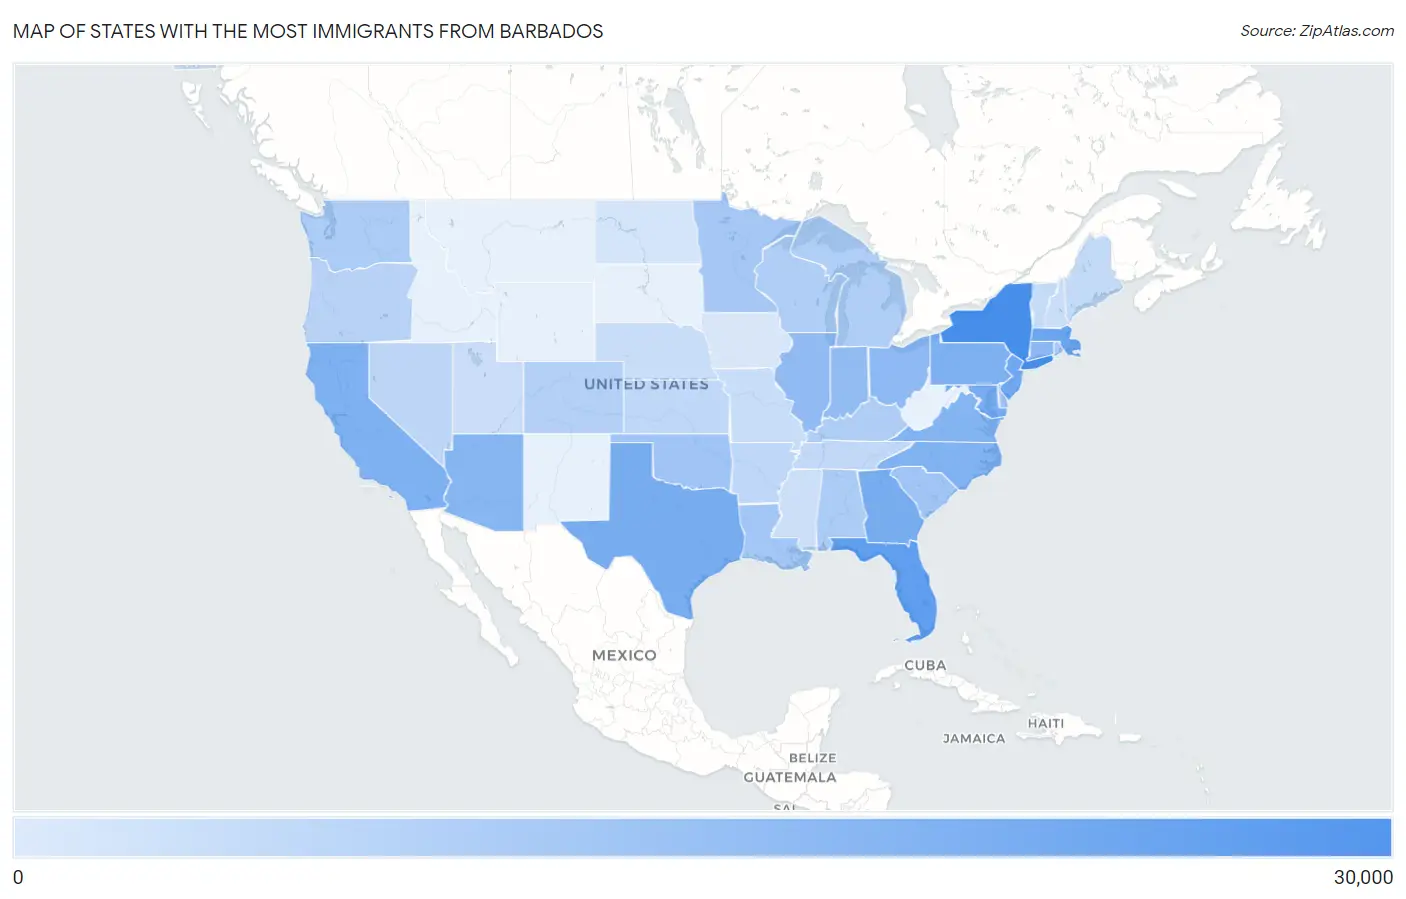 States with the Most Immigrants from Barbados in the United States Map